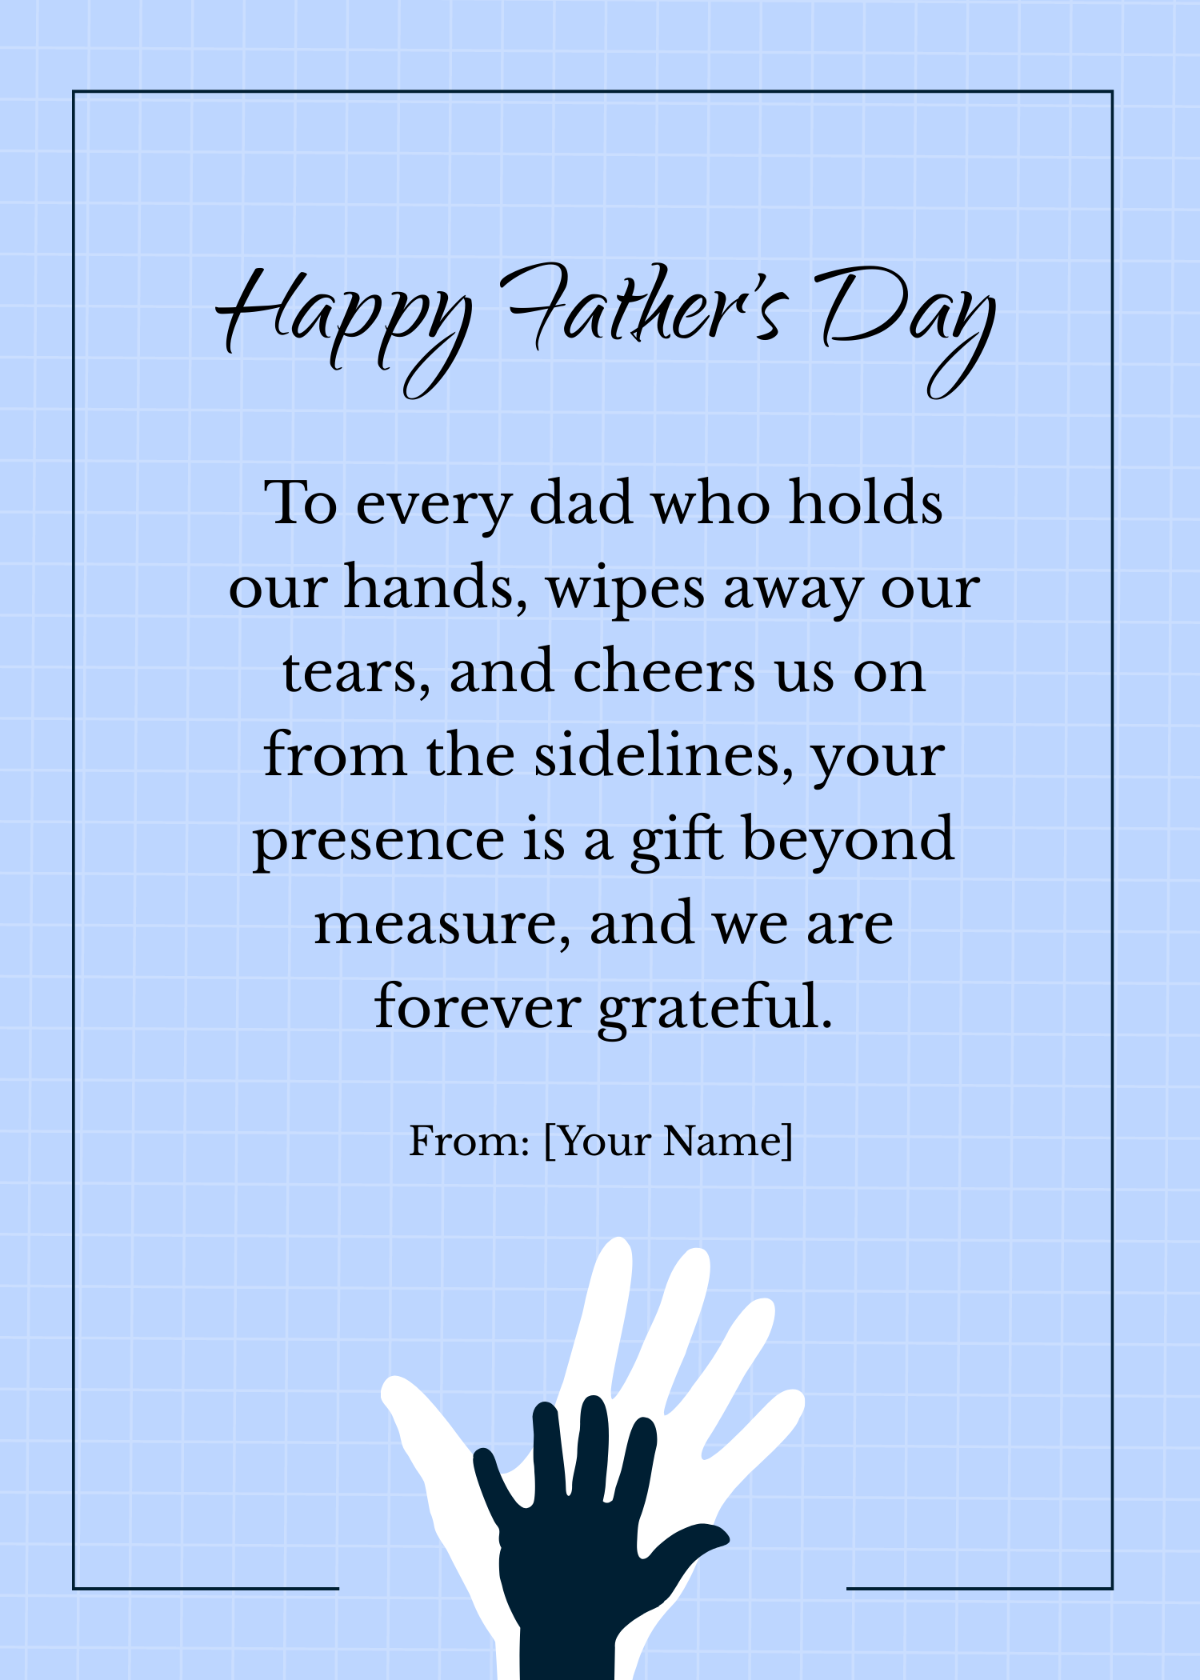 Happy Father's Day Message